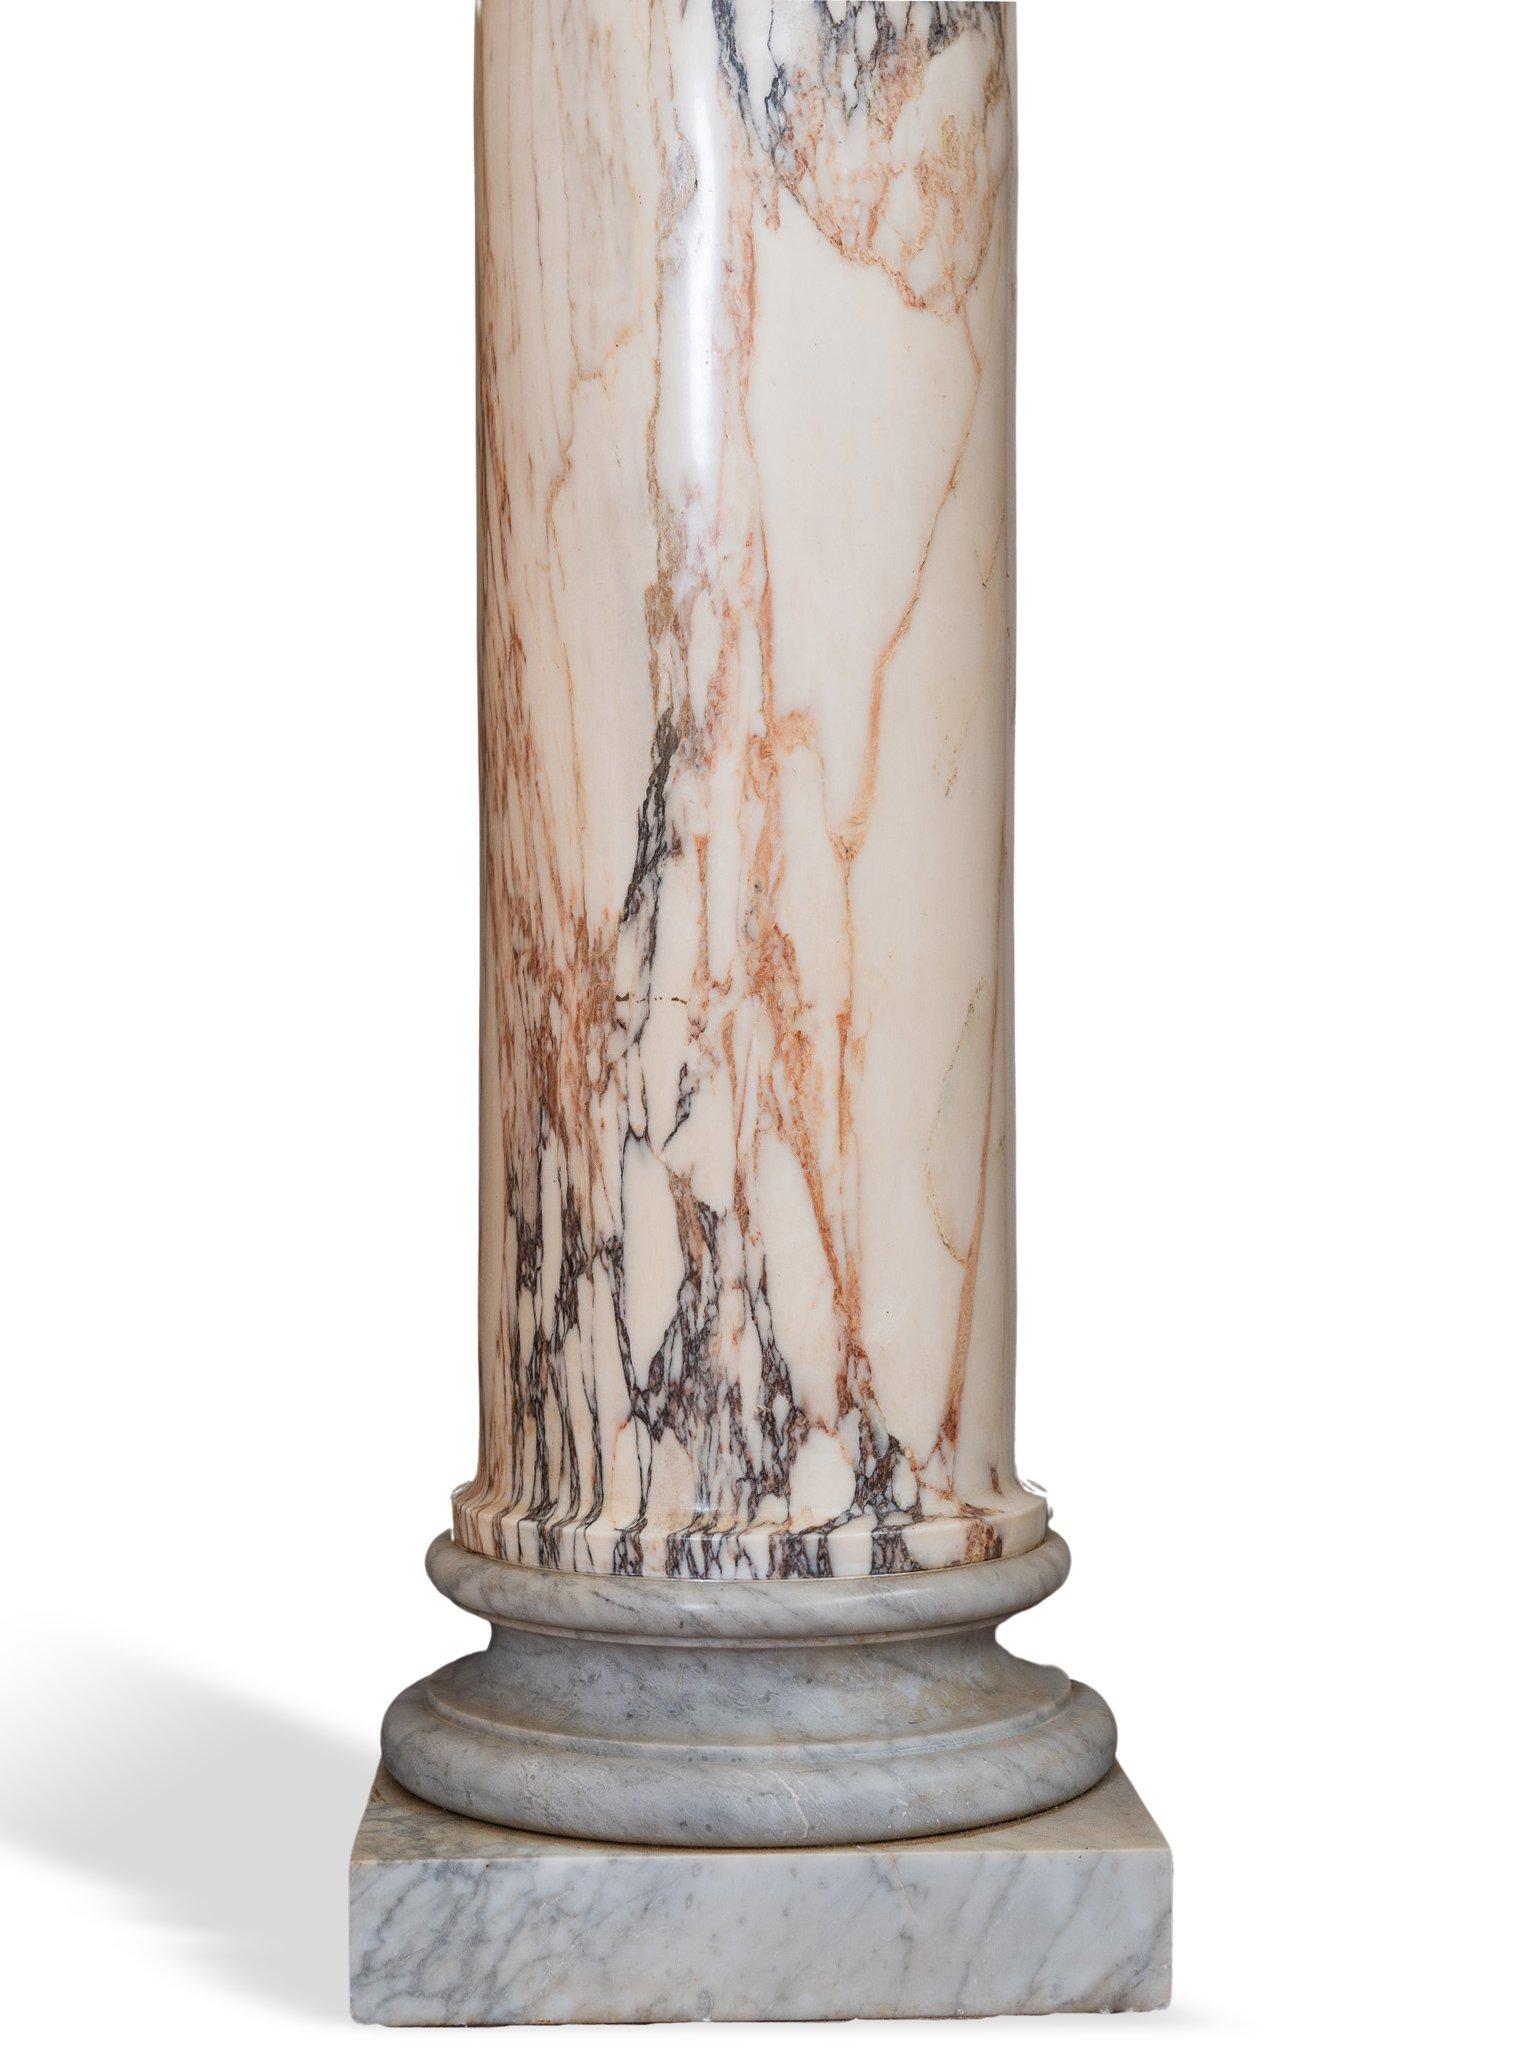 Pair of columns in Pavonazzetto marble. ADDITIONAL PHOTOS, INFORMATION OF THE LOT AND SHIPPING INFORMATION CAN BE REQUEST BY SENDING AN EMAIL. Tags: Coppia di colonne in marmo Pavonazzetto. Par de columnas en mármol Pavonazzetto. Paire de colonnes